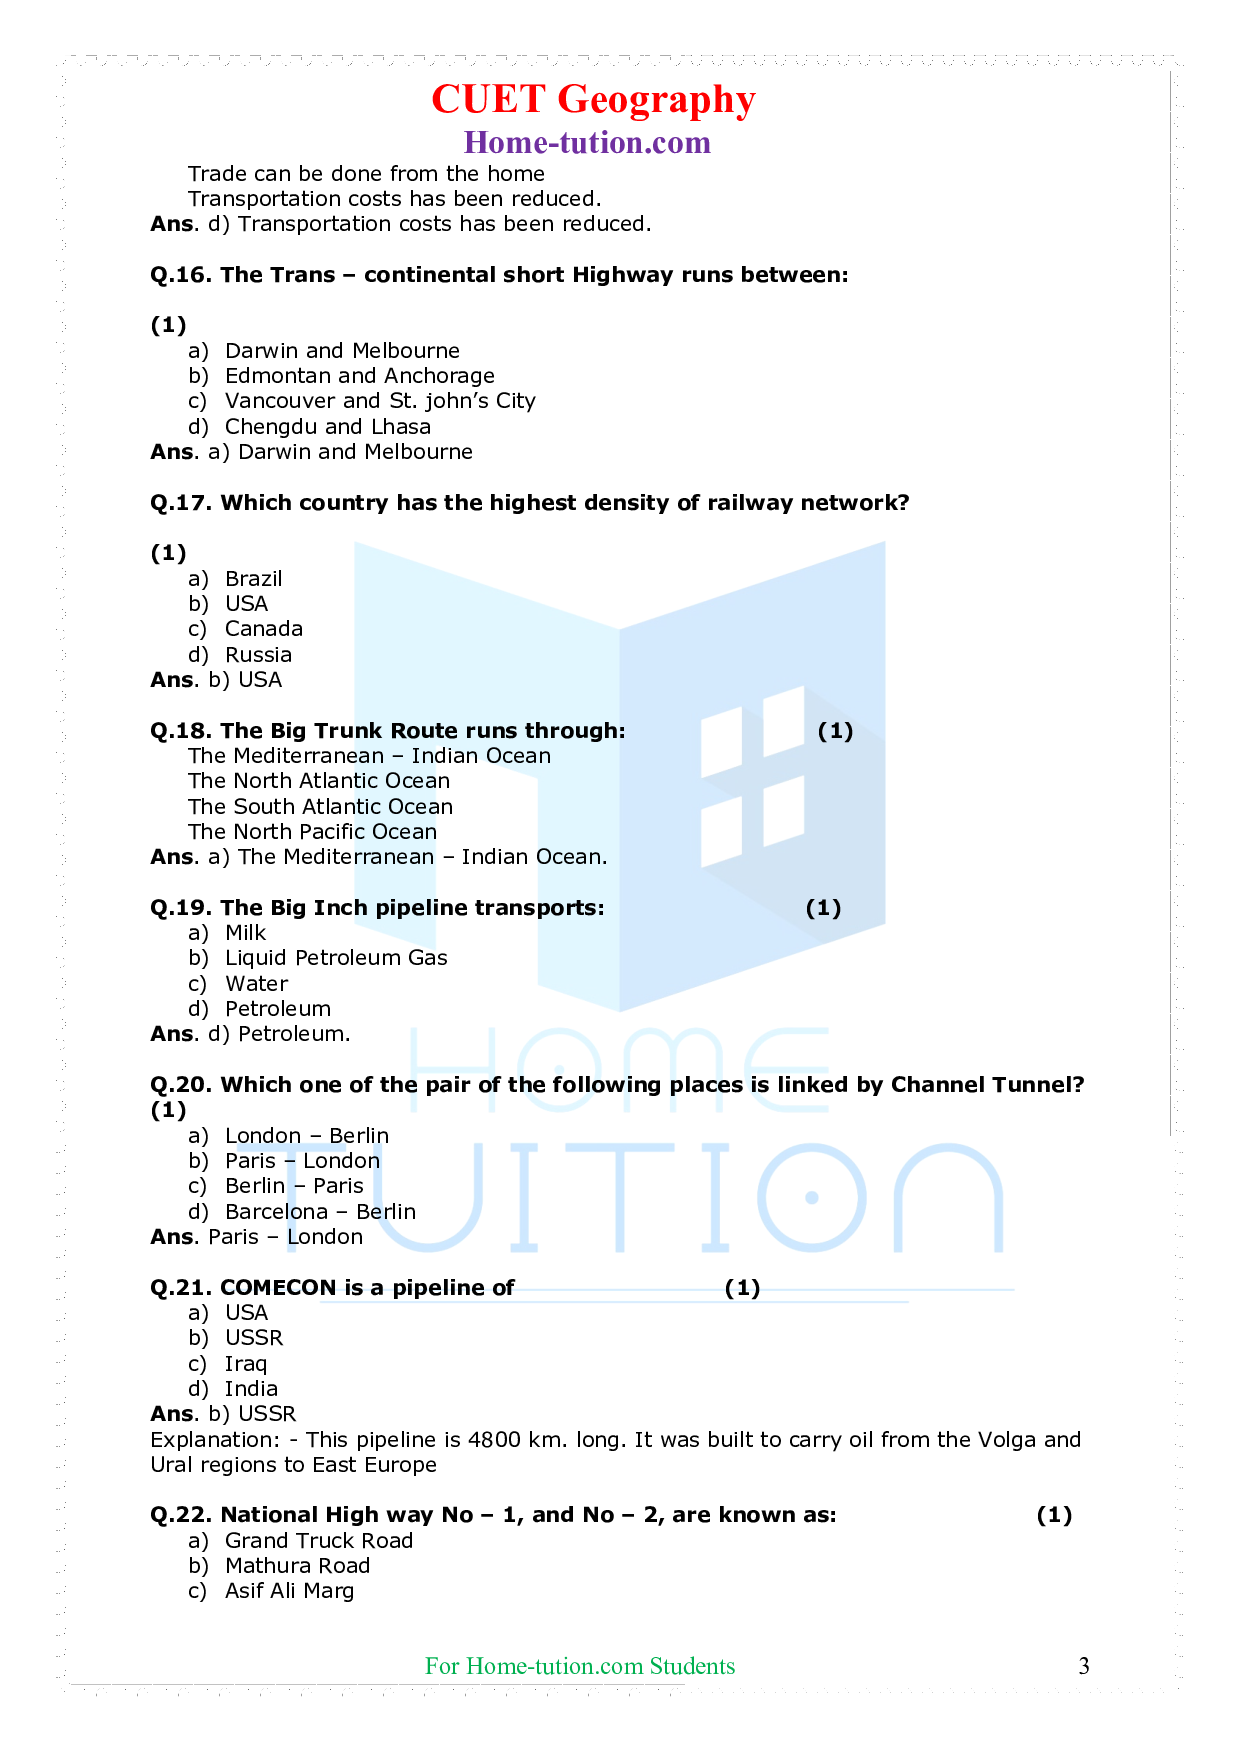 CUET Fundamentals of Human Geography Chapter 8 Transport and Communication